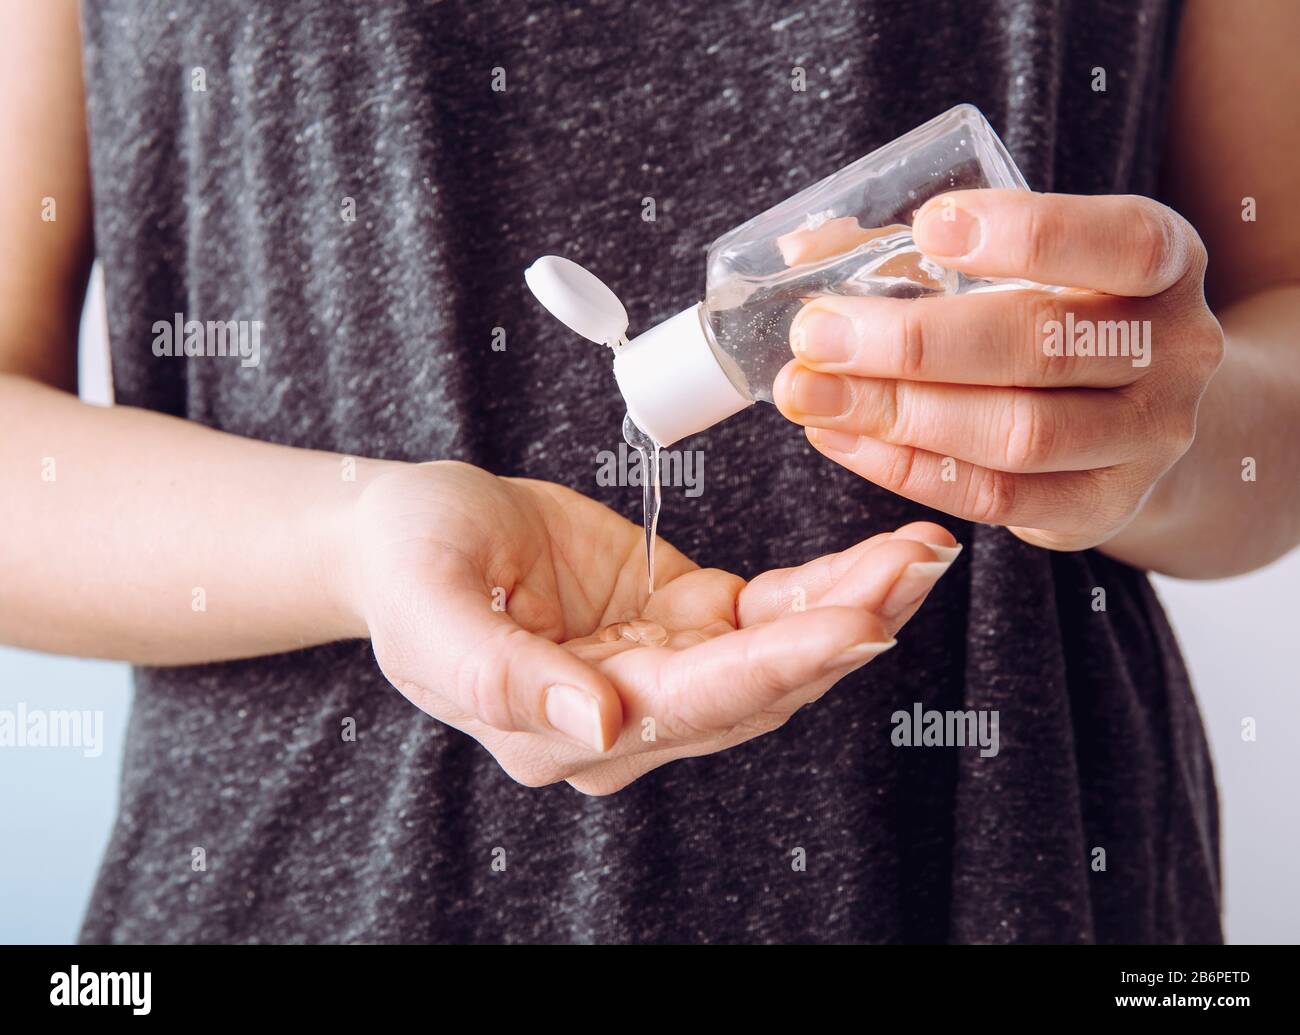 Close up view of woman person using small portable antibacterial hand sanitizer on hands. Stock Photo